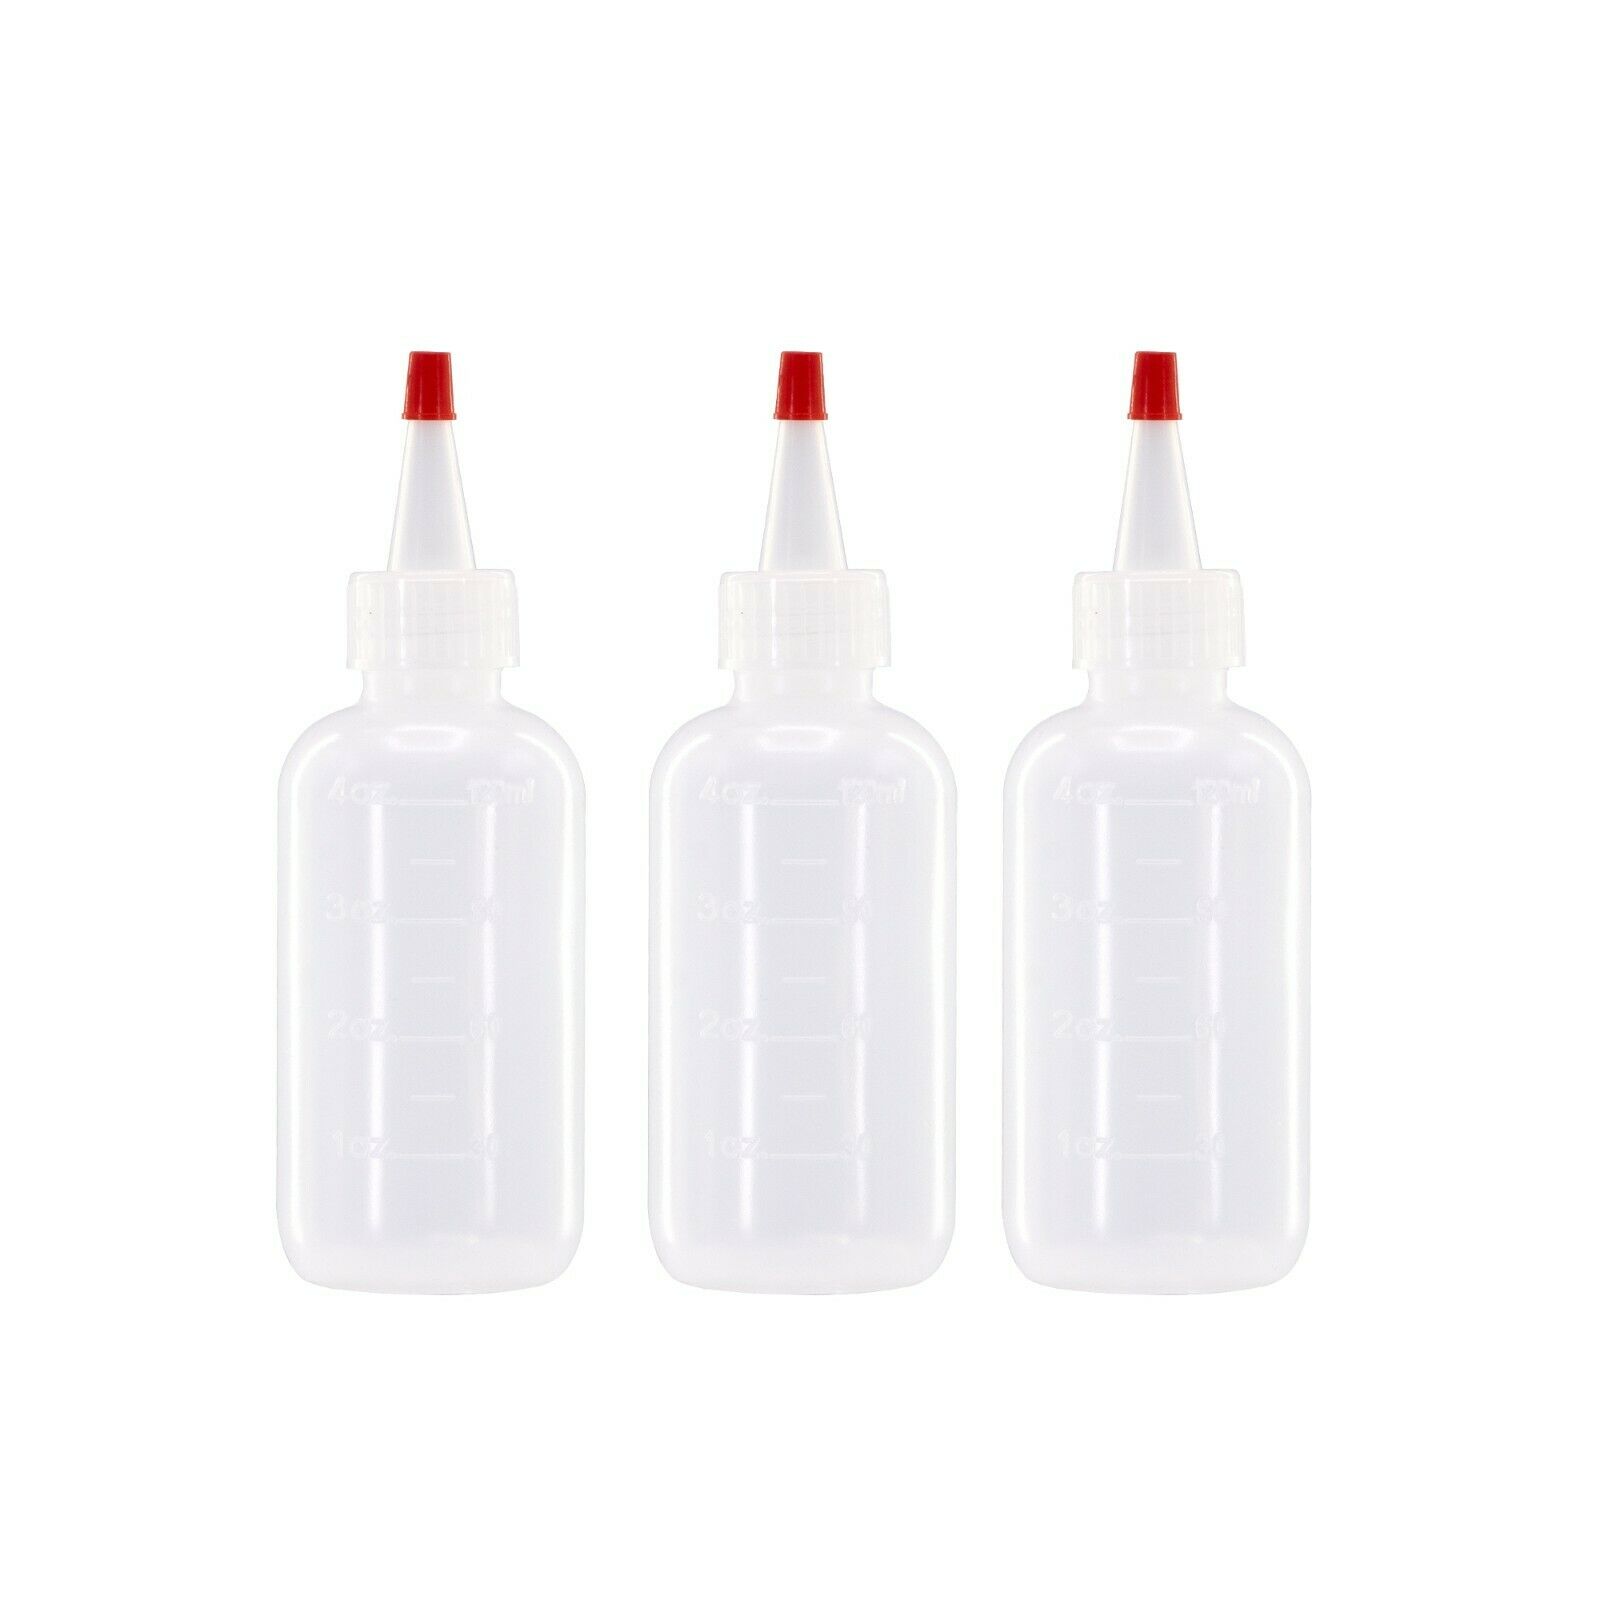 3 Pack Of 4oz (120ml) Plastic Boston Round Squeeze Bottles + Yorker Caps Ldpe